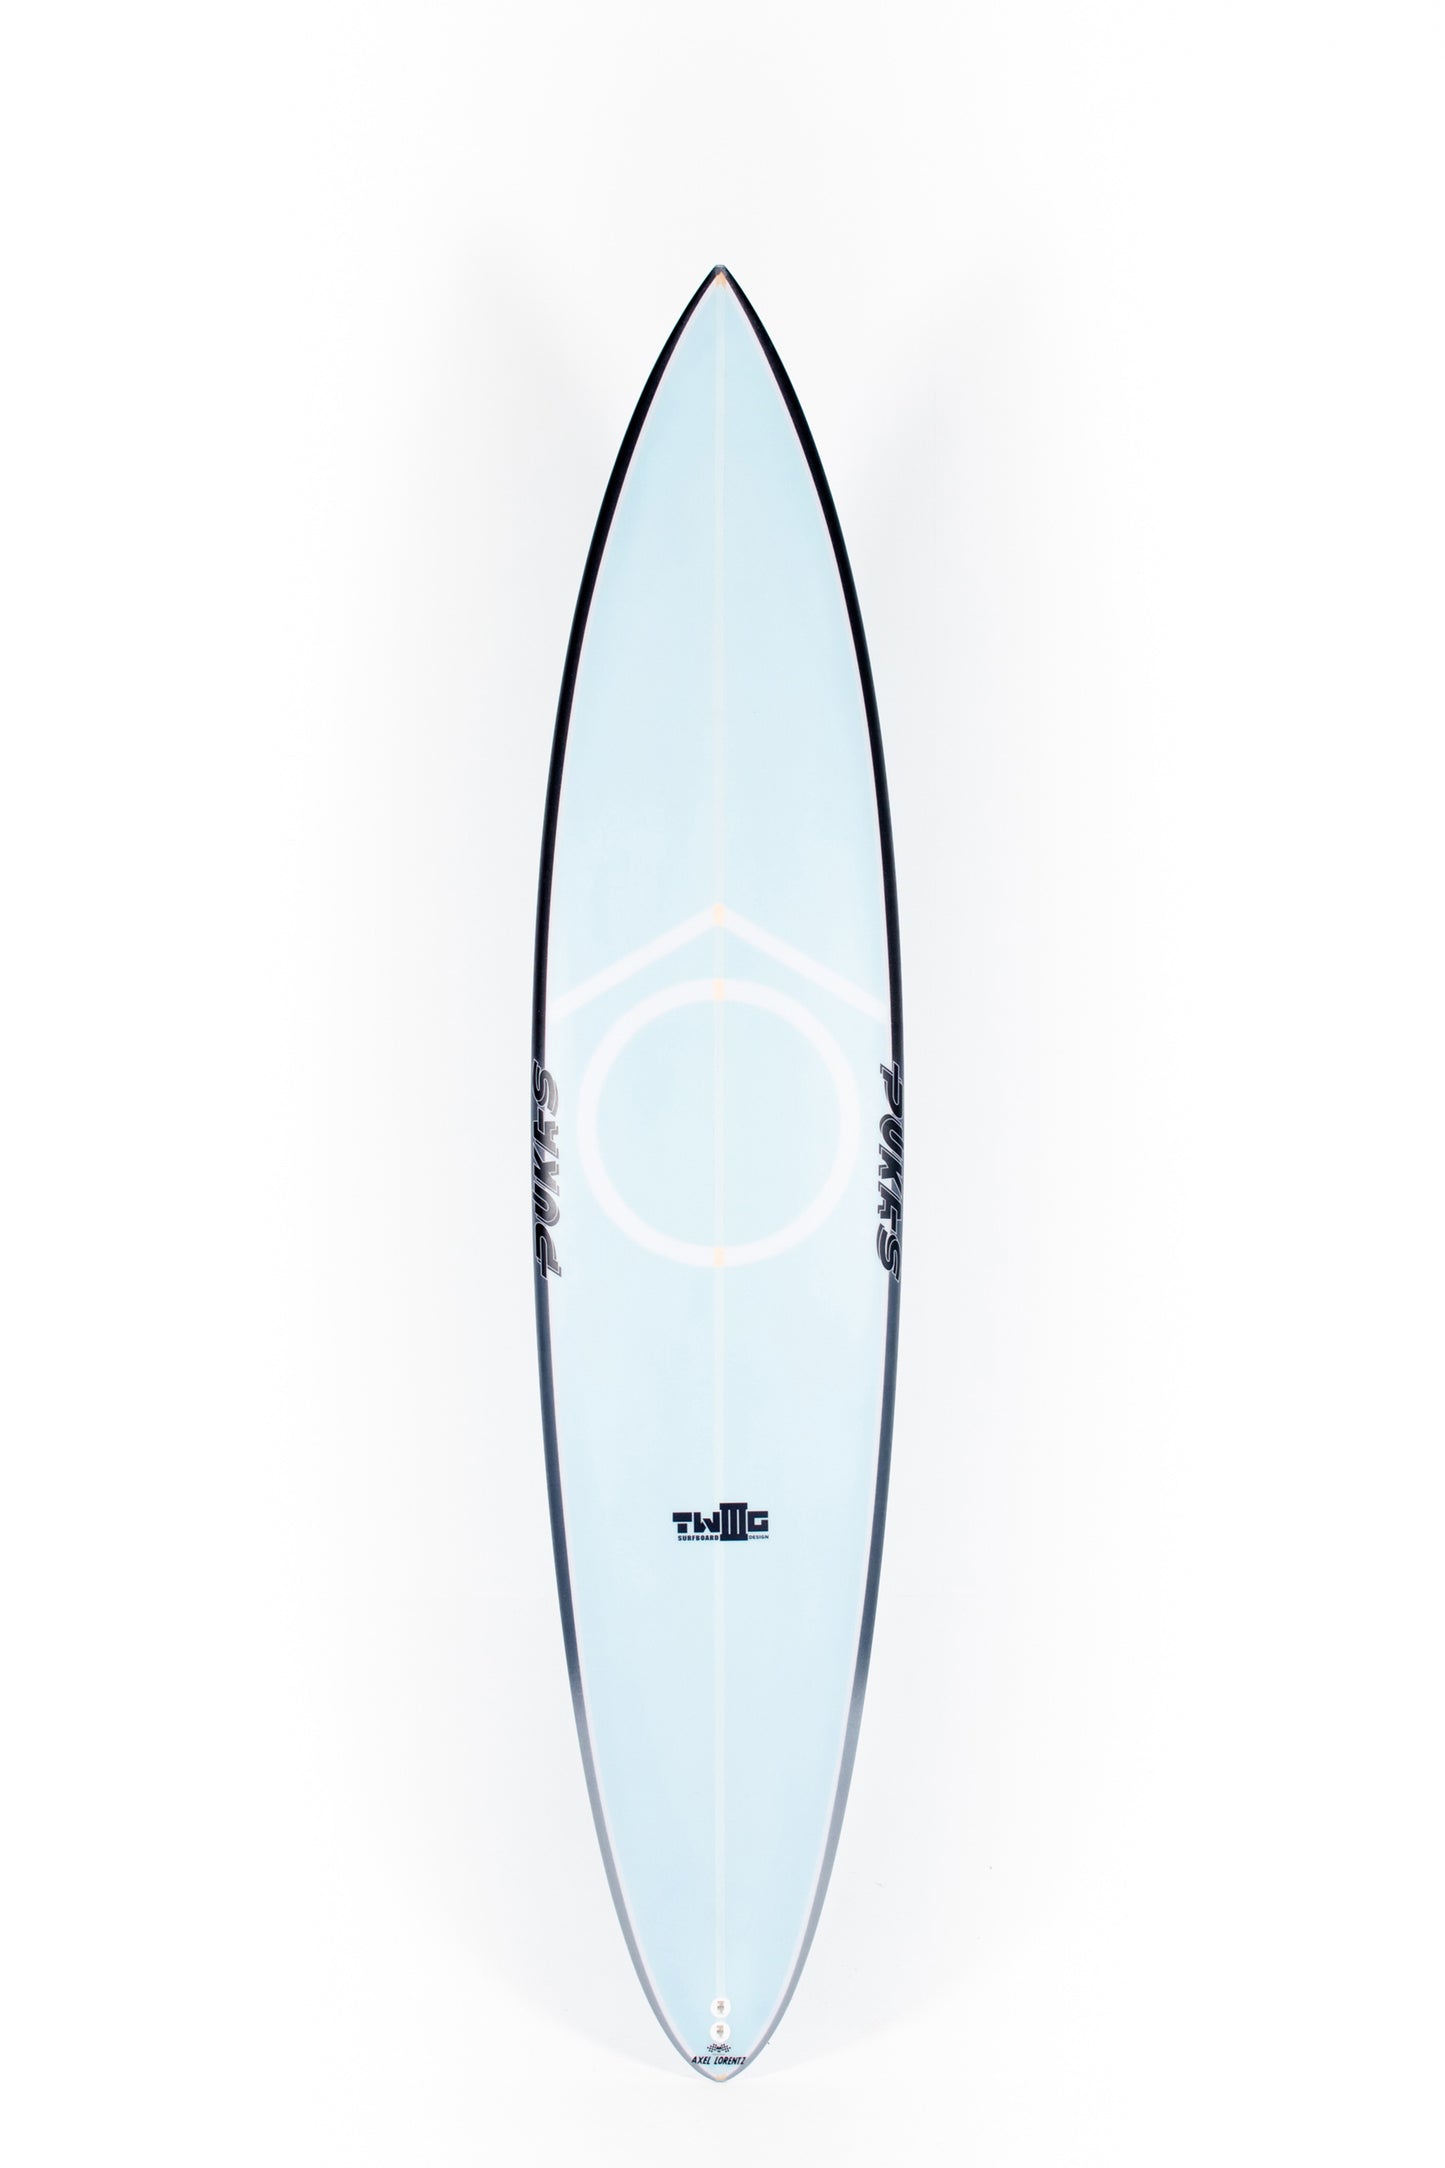 Pukas Surf Shop - Pukas Surfboard - TWIG CHARGER by Axel Lorentz - 8´0” x 20,13 x 3,25 - 52,55L  AX06174